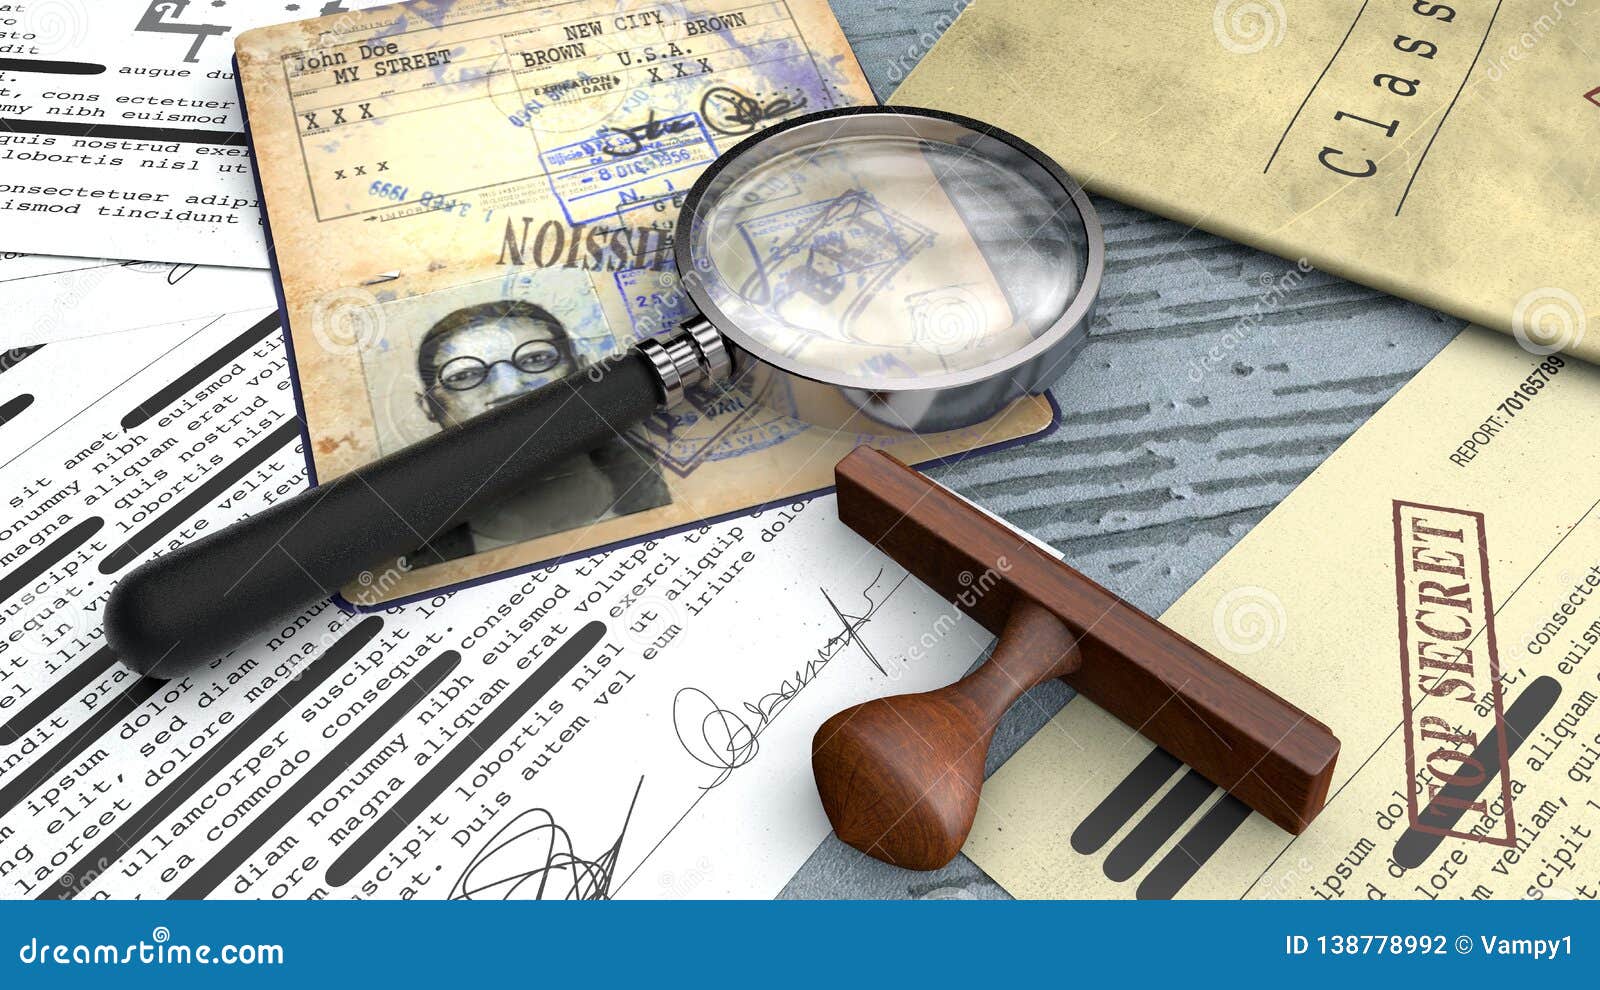 2 172 Top Secret Document Photos Free Royalty Free Stock Photos From Dreamstime